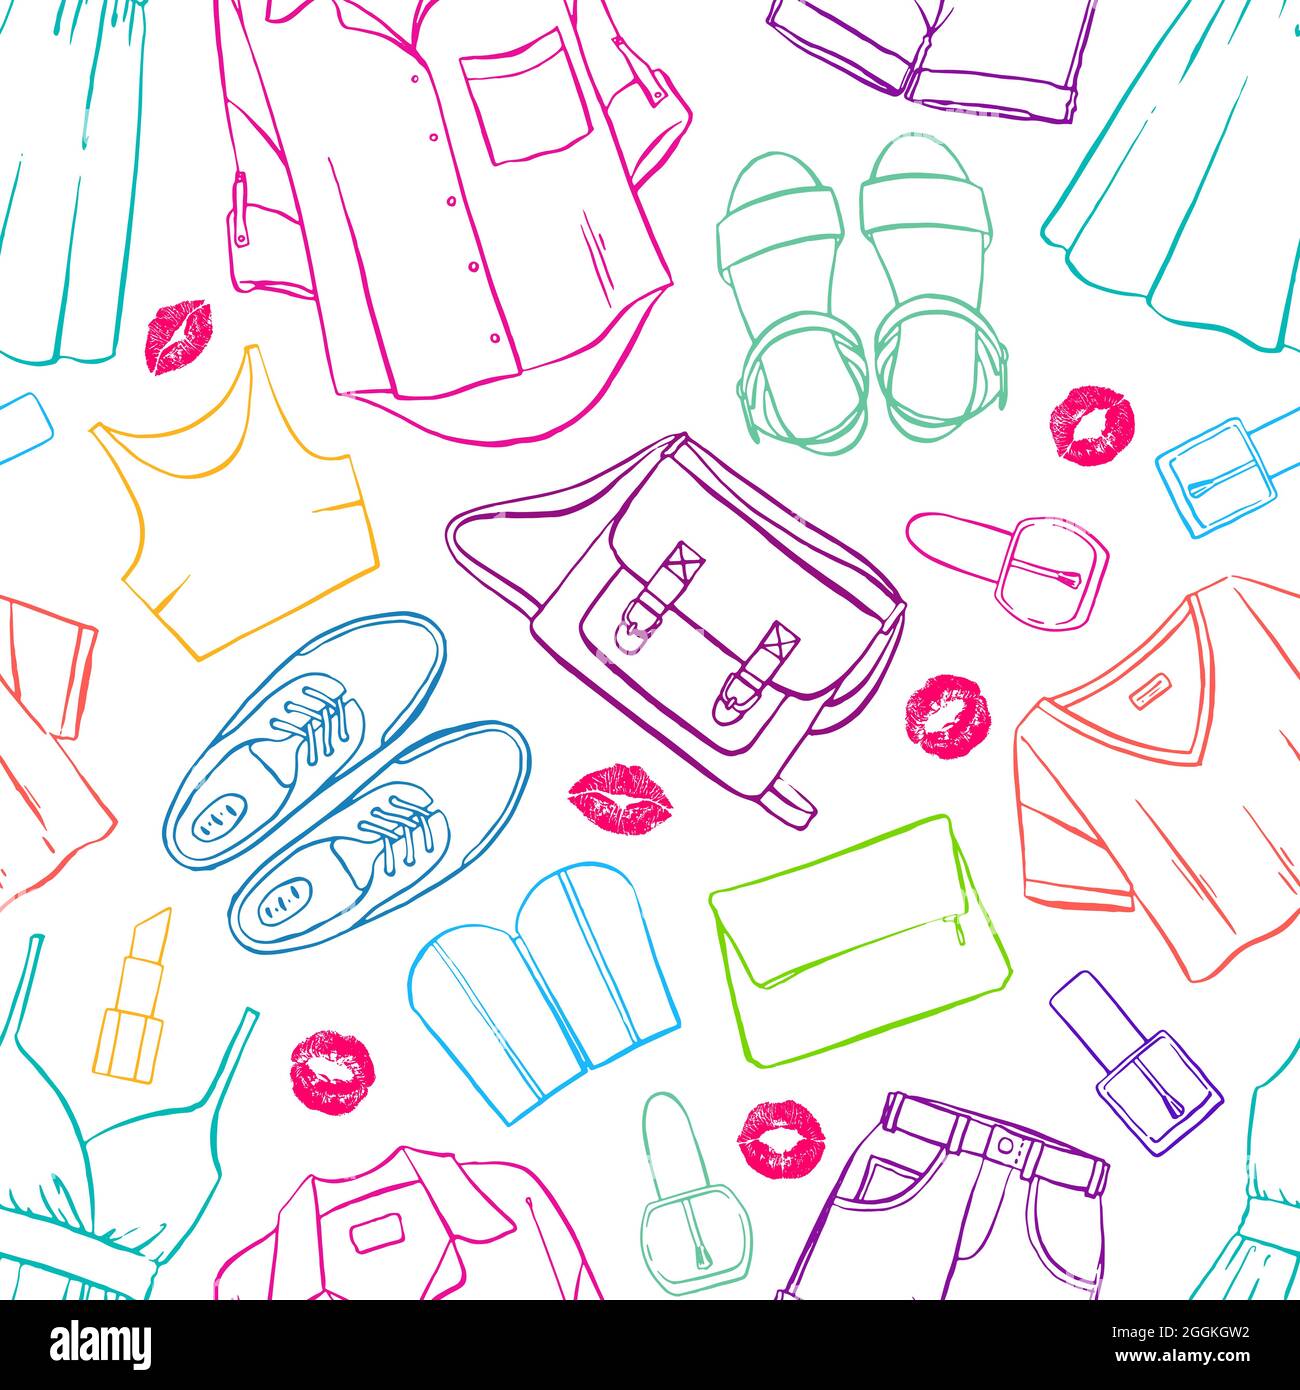 seamless background with various women's colorful clothing and accessories Stock Vector